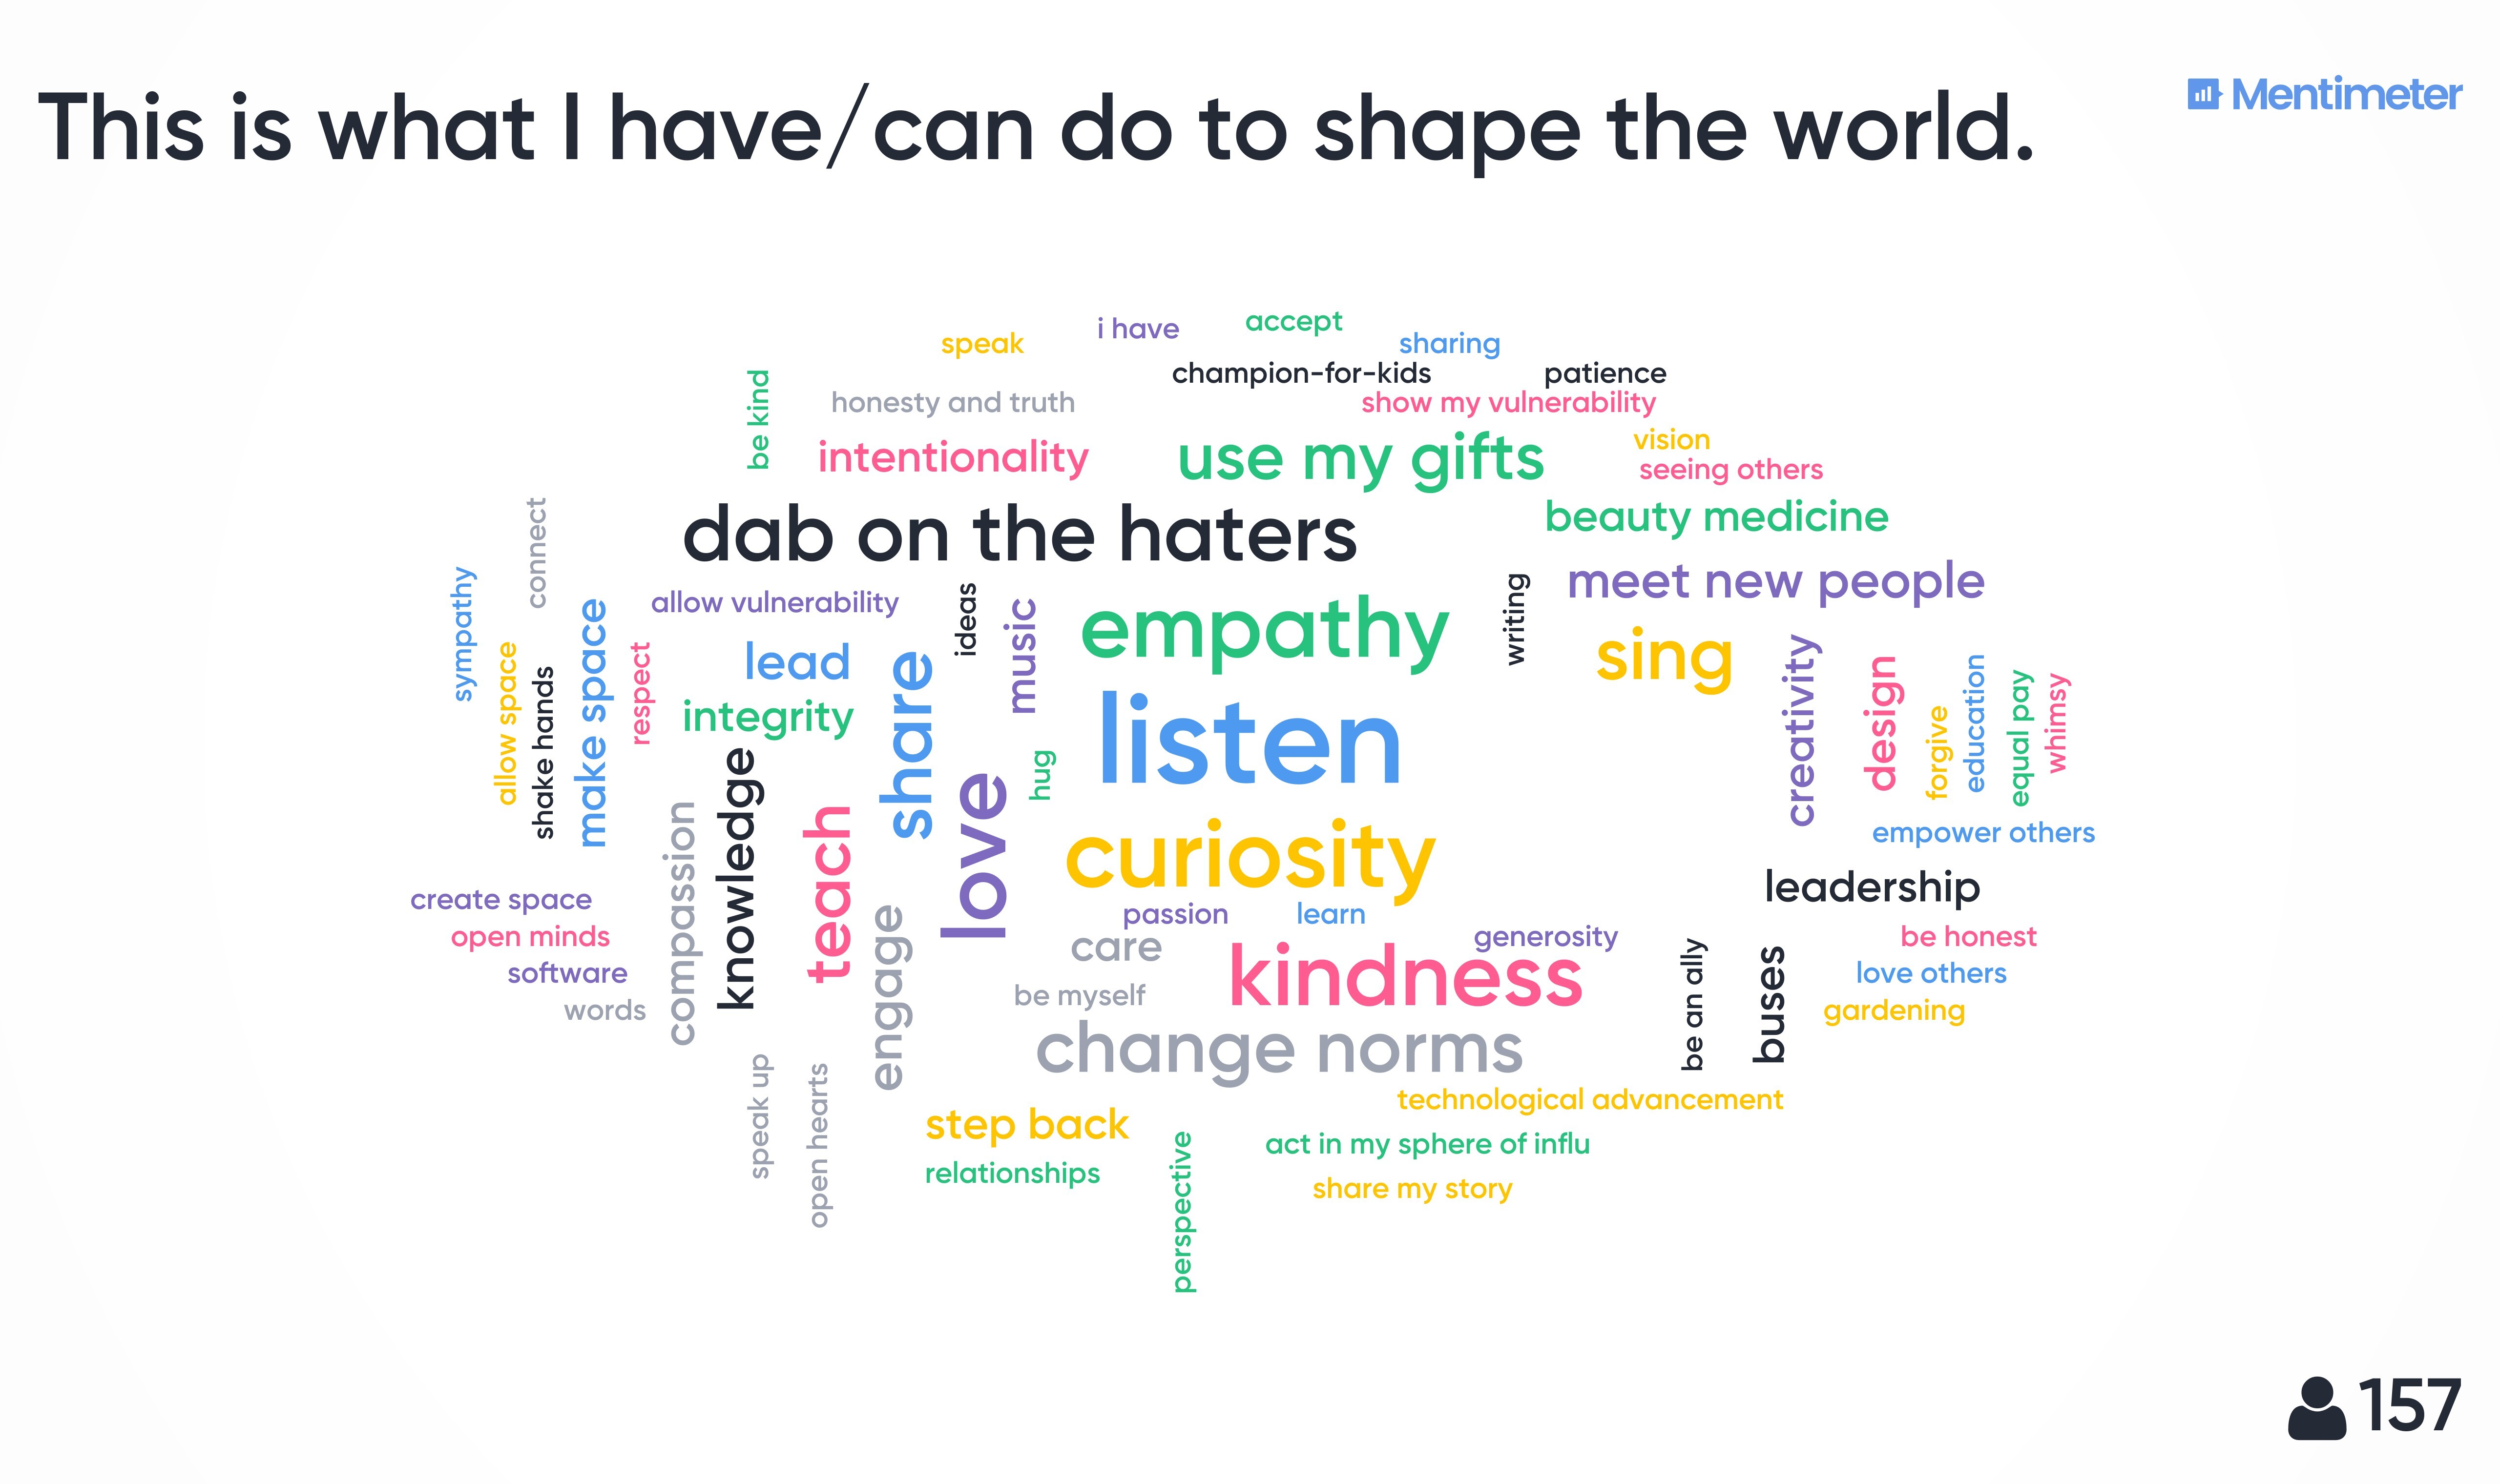 WORDCLOUD2-this-is-what-i-havecan-do-to-shape-the-world-.jpg